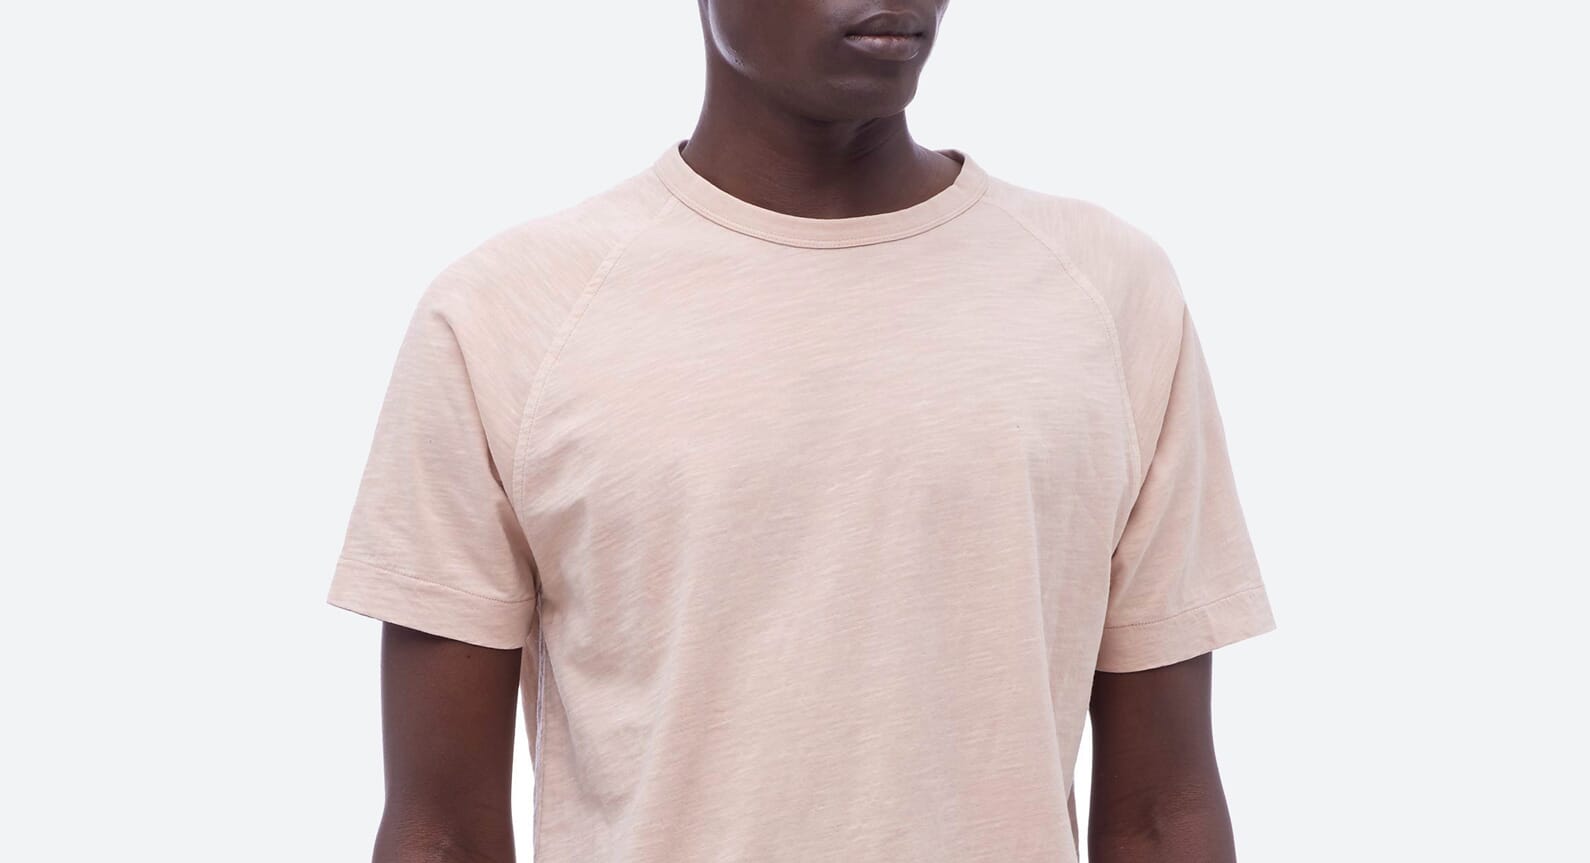 10 T-Shirts To Top Up Your Summer Wardrobe